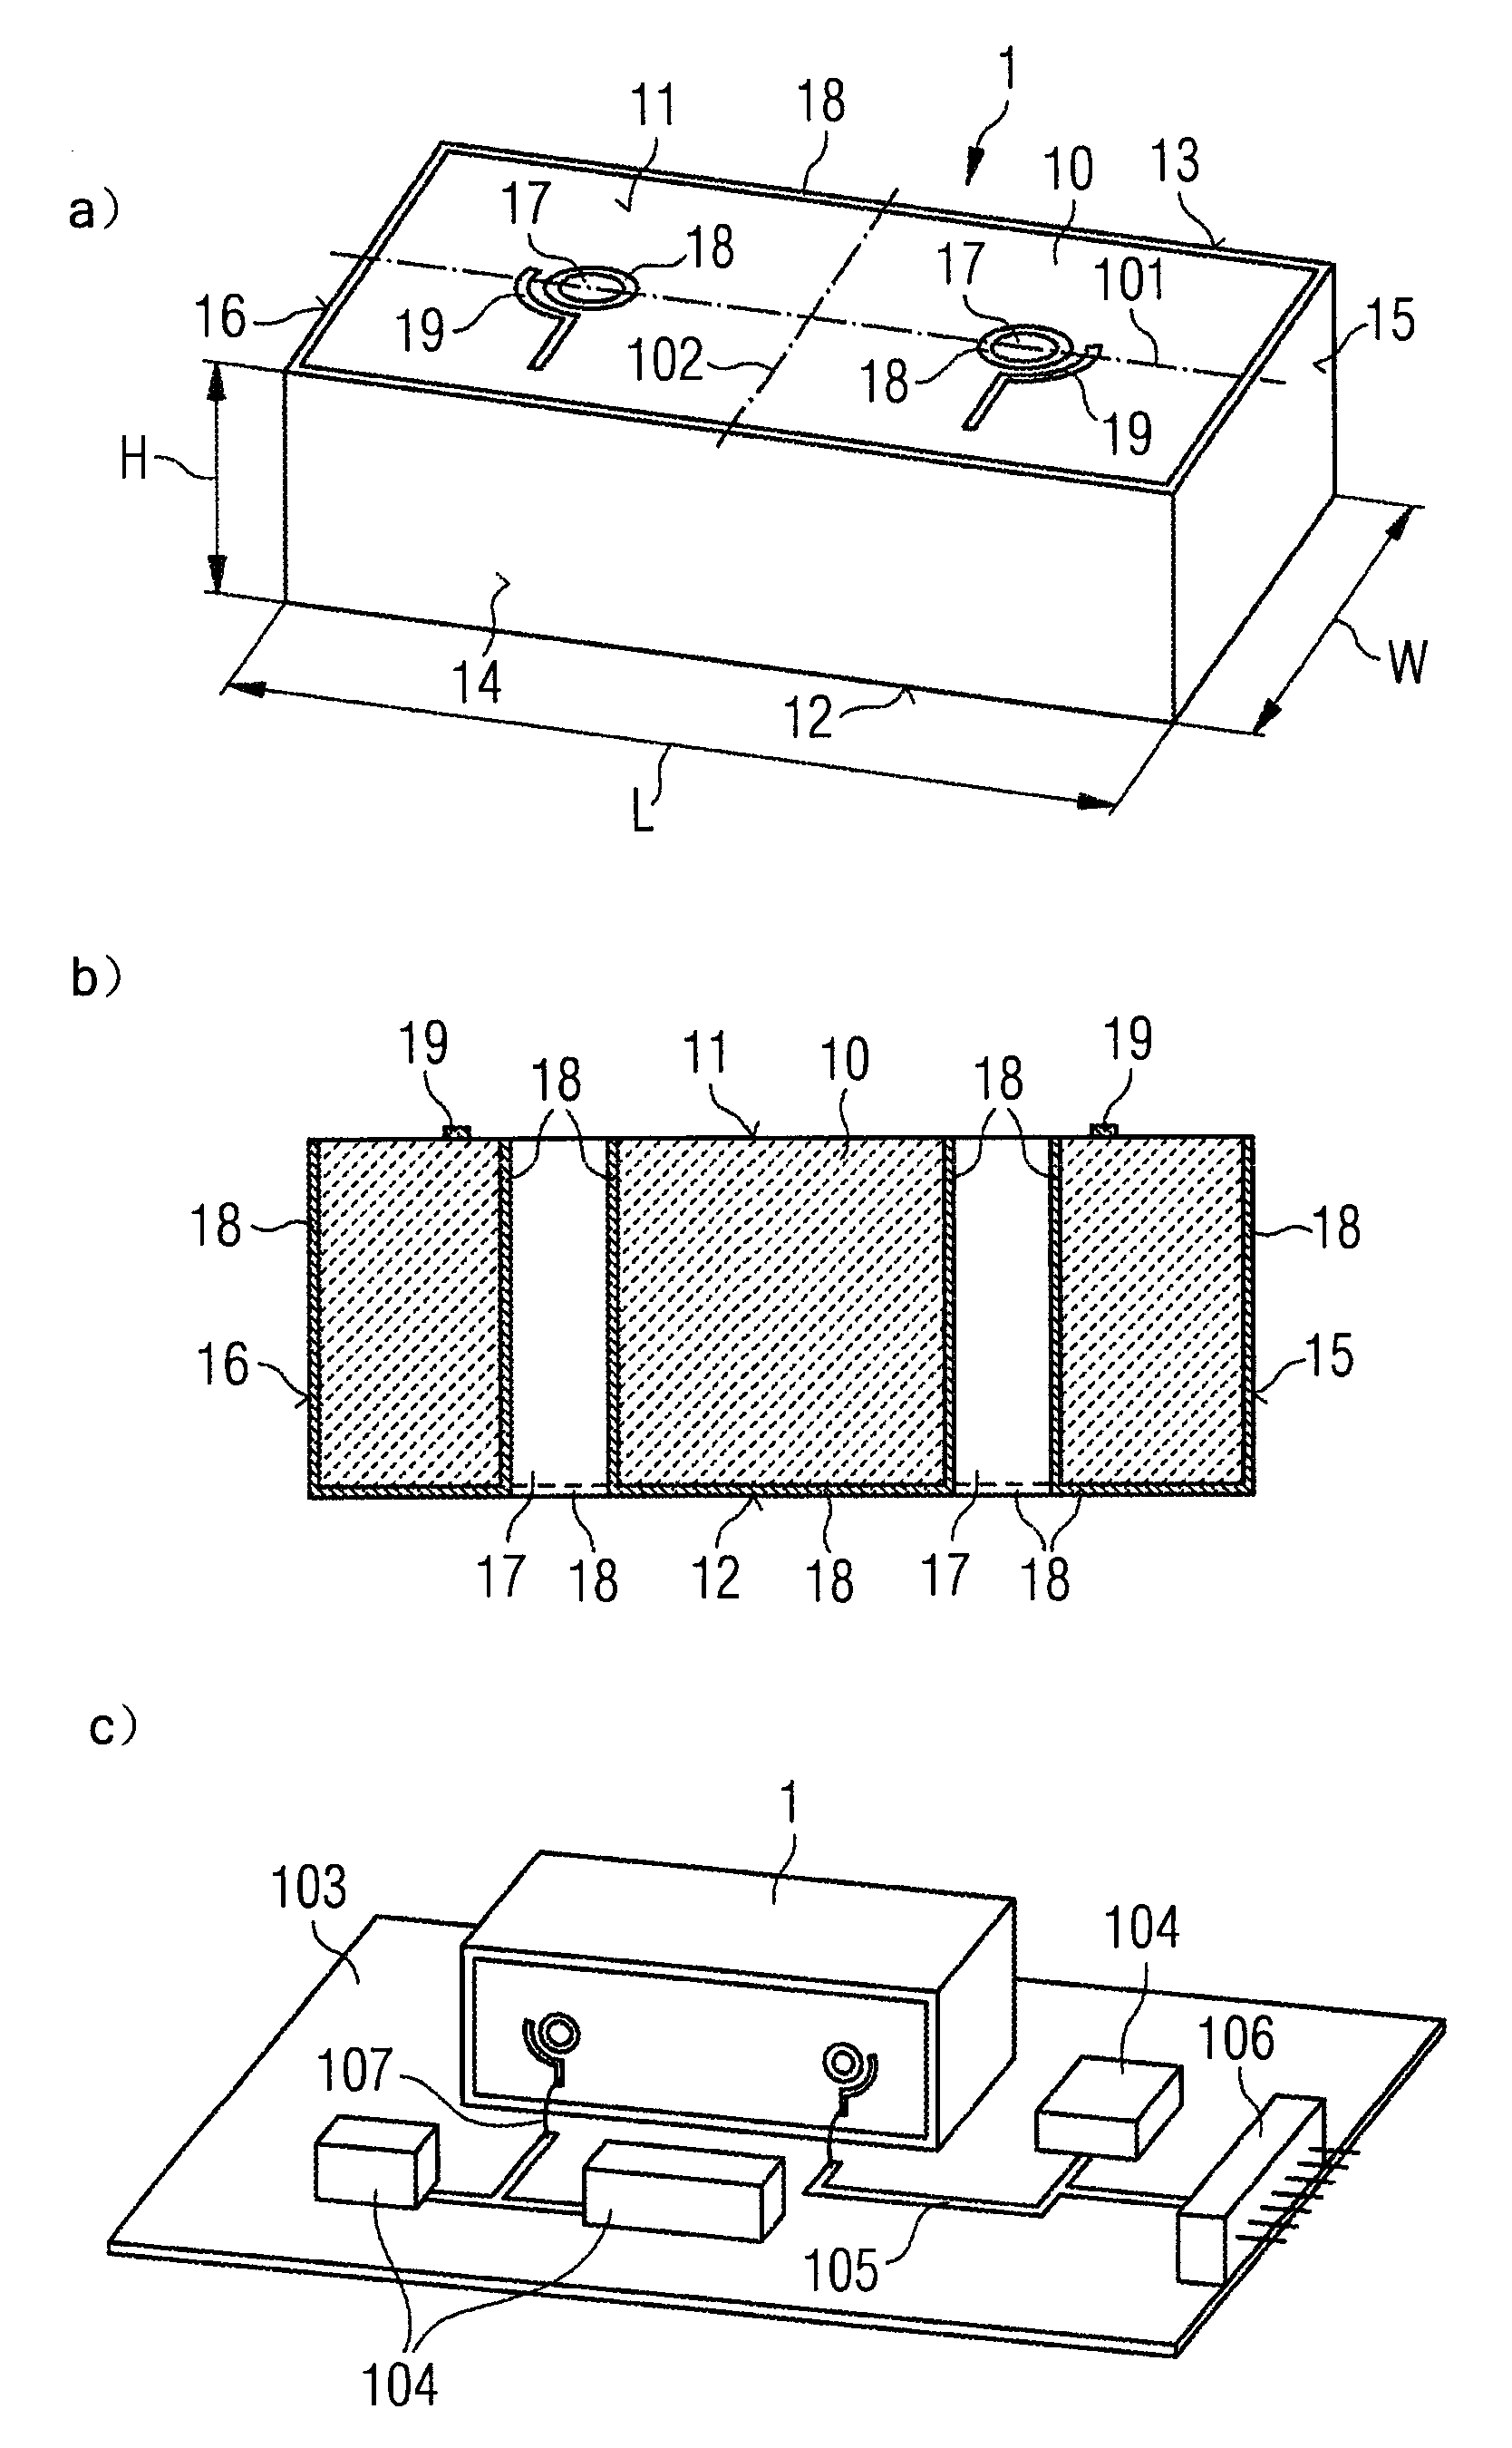 Filter for electronic signals and method for manufacturing it